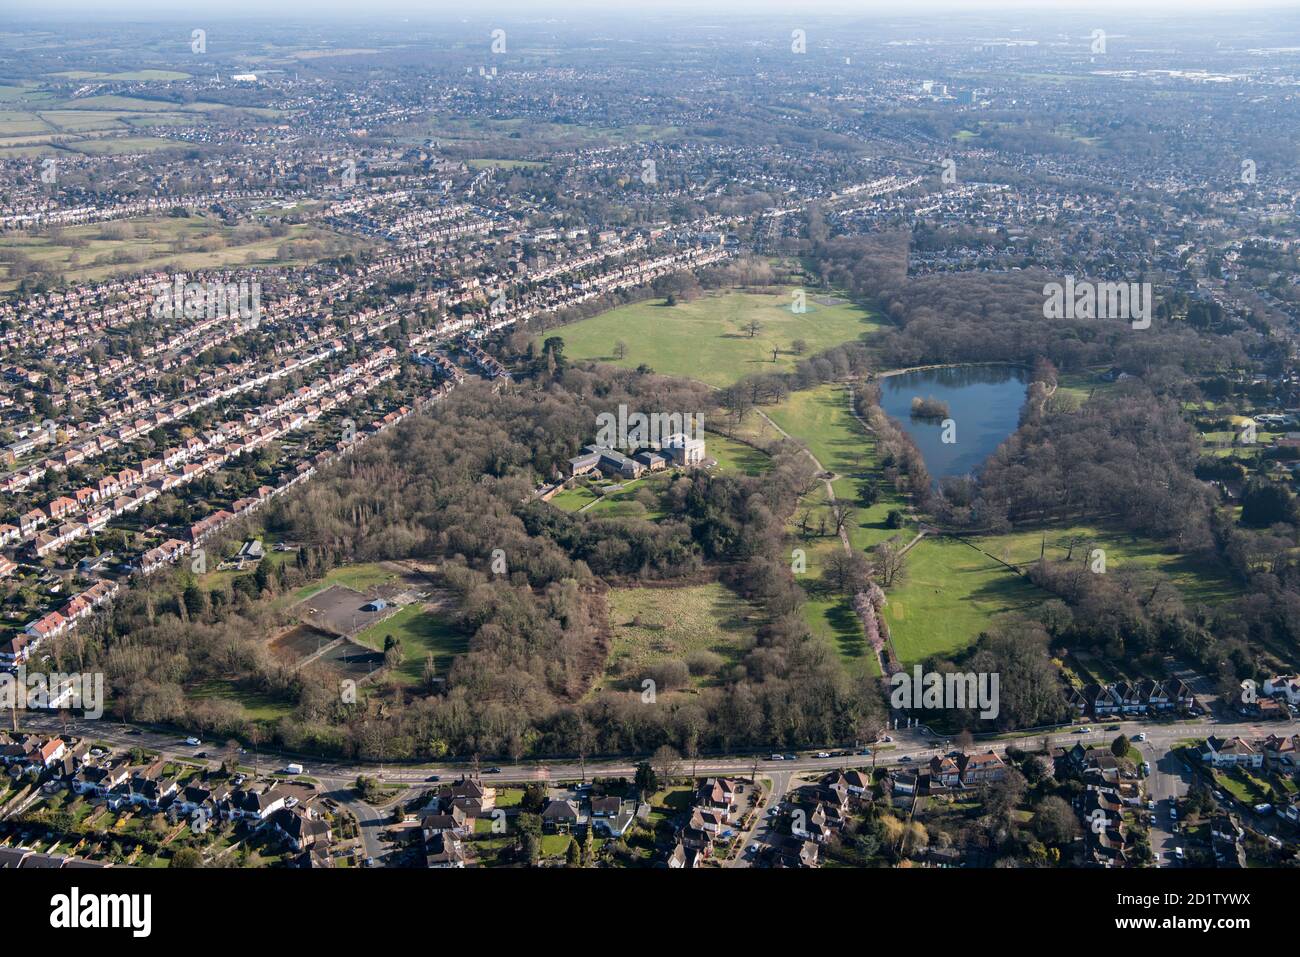 Grovelands Park, a Repton commission, Southgate, London, 2018, UK. Aerial view. Stock Photo